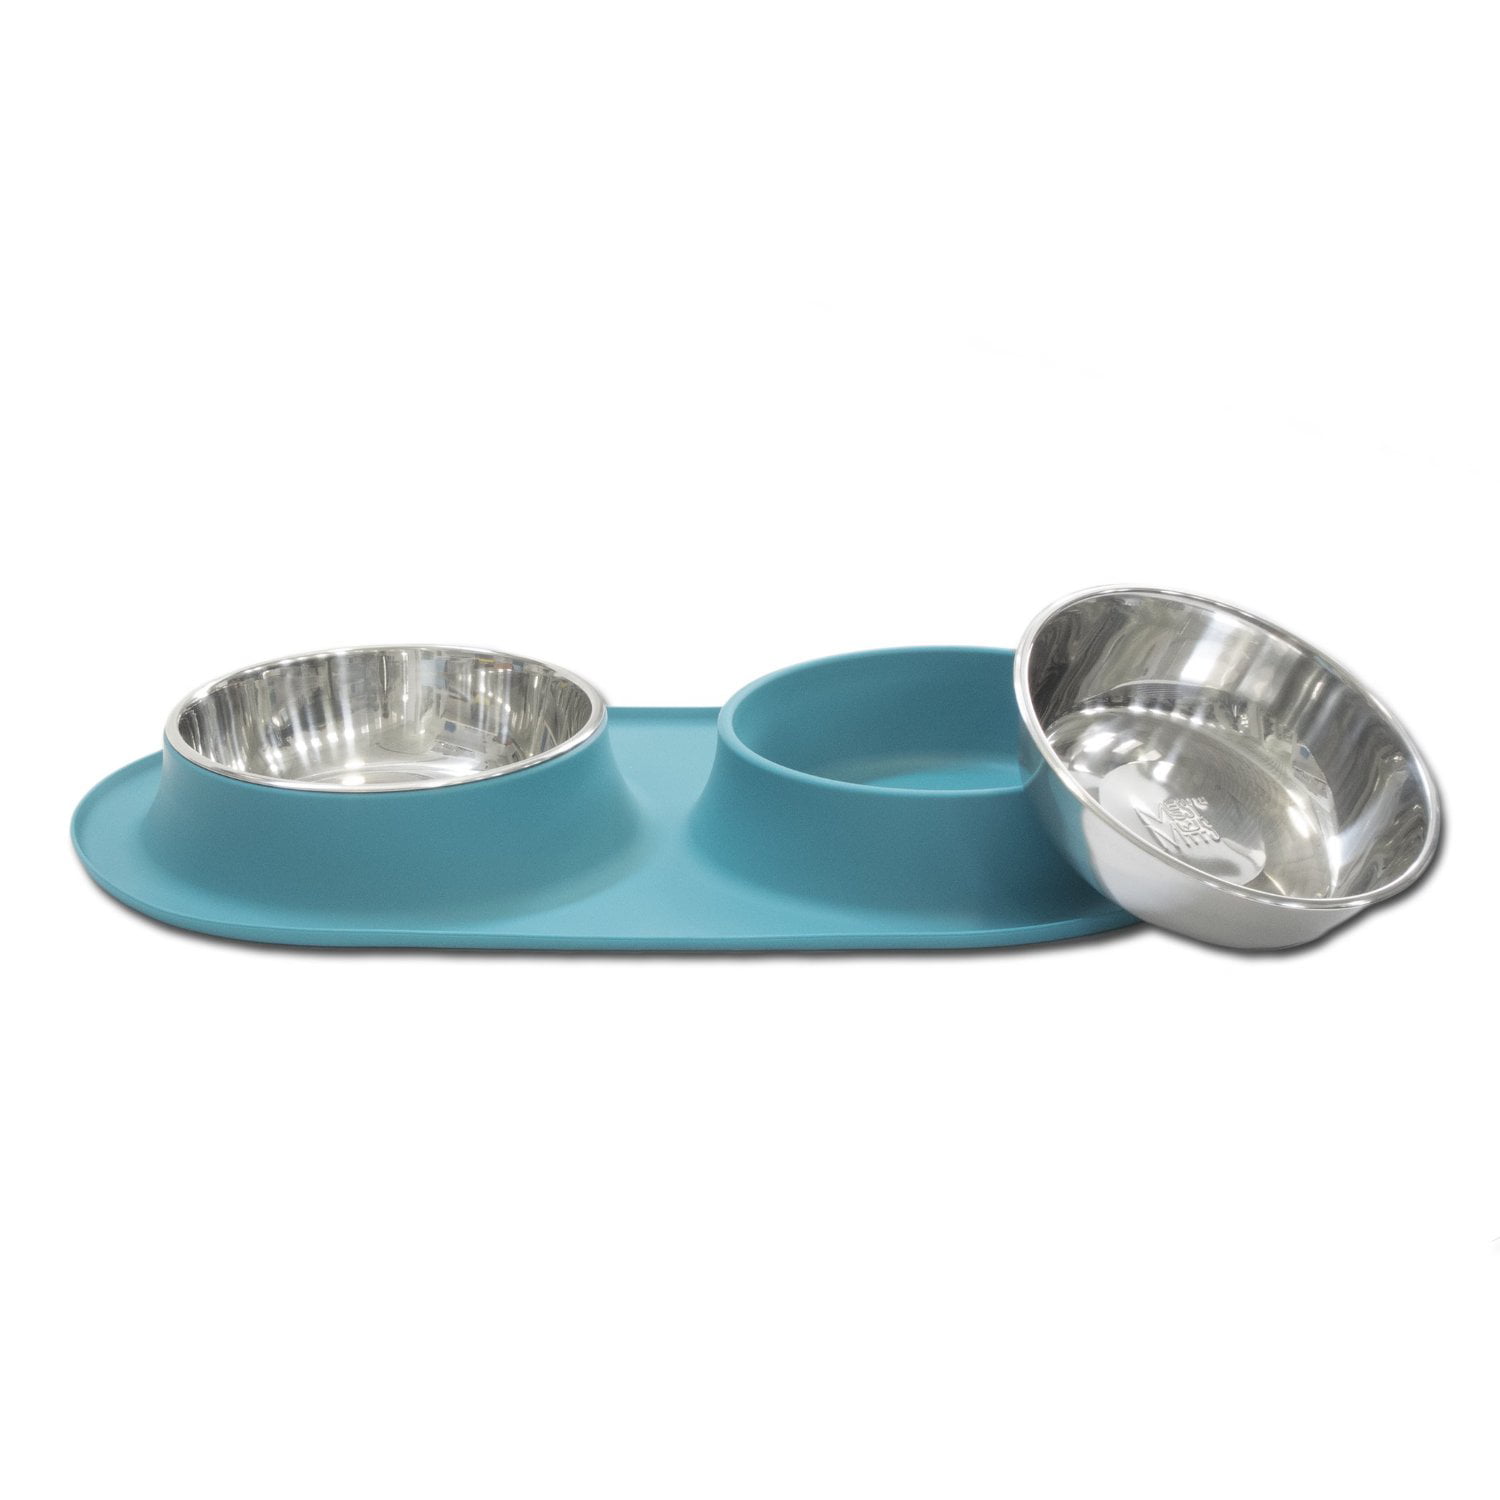 Messy Mutts Stainless Steel Double Dog Feeder with Non-Slip Silicone Base 